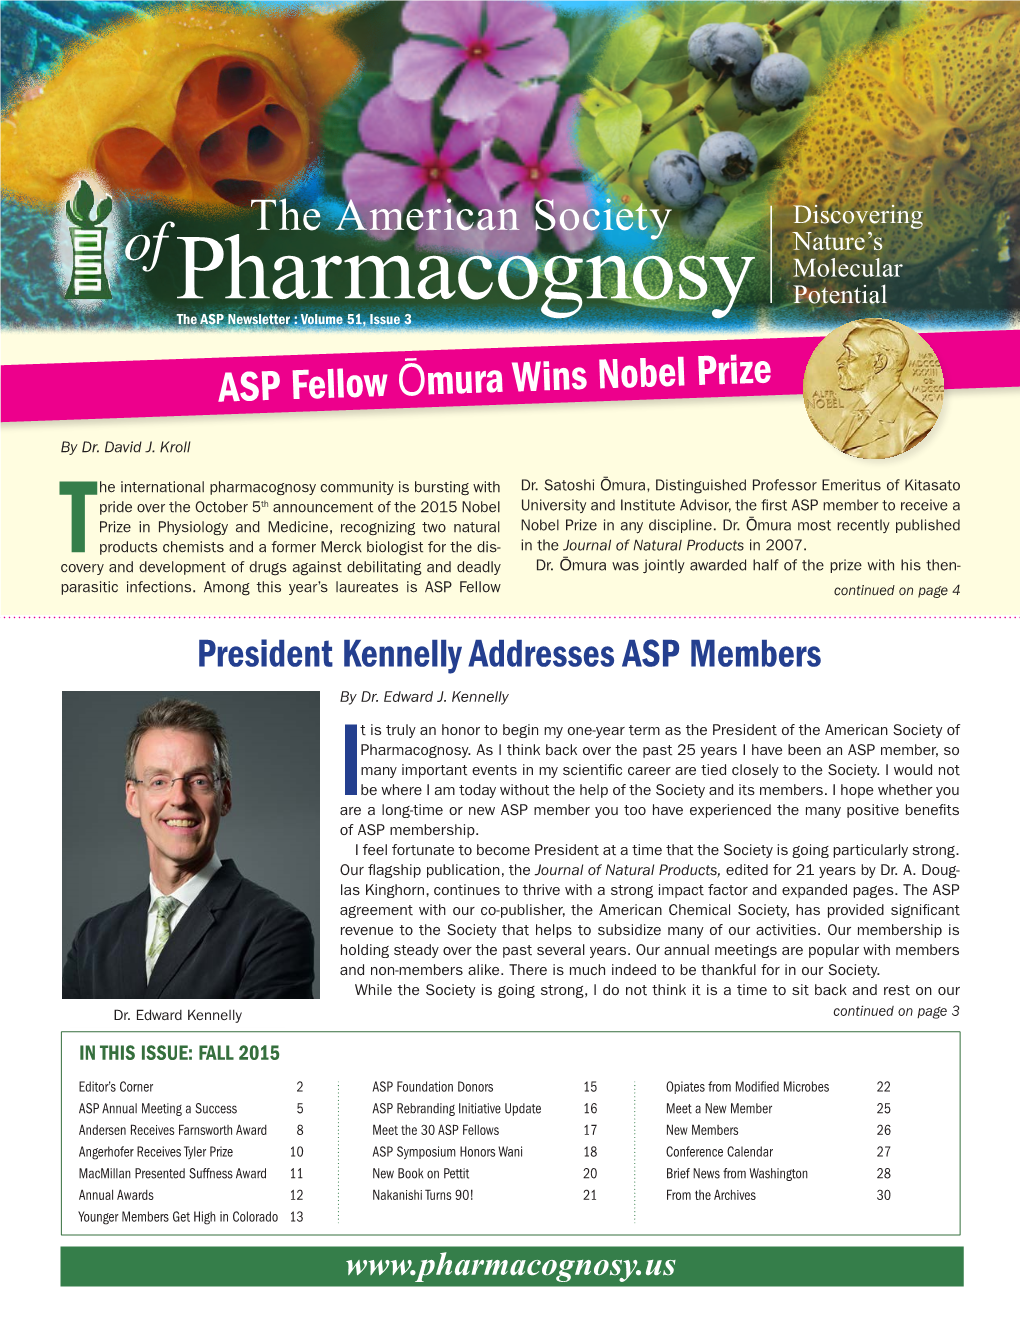 ASP NEWSLETTER VOLUME 51, ISSUE 3 PAGE 2 President Kennelly Addresses ASP Members